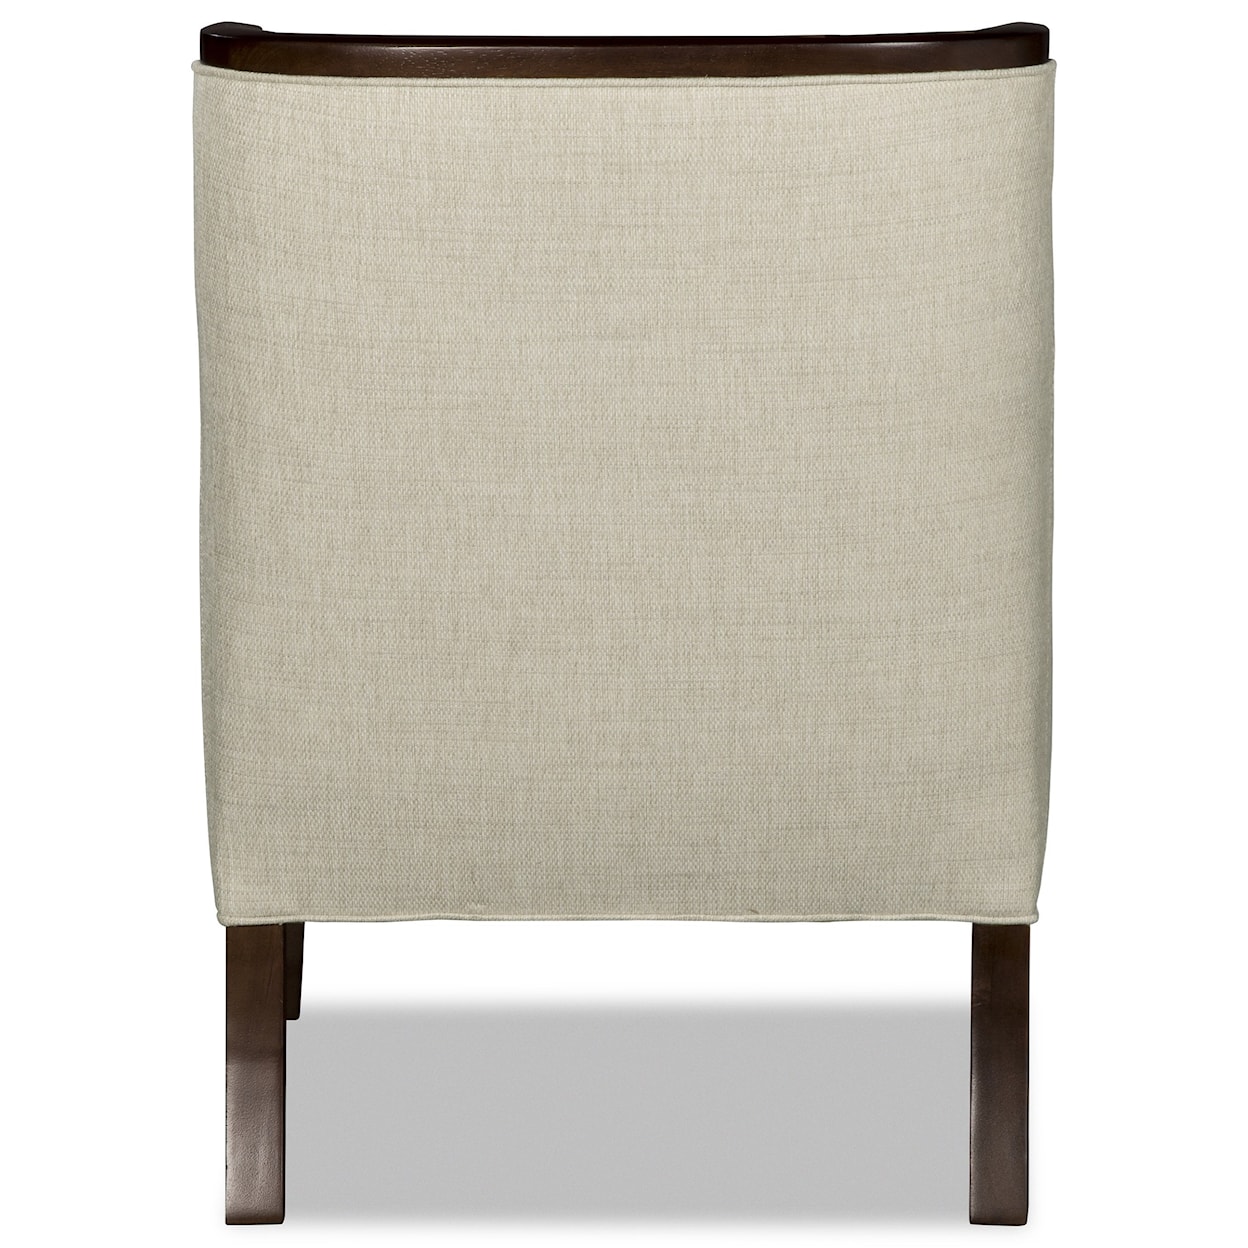 Craftmaster 001810 Wood Accent Chair